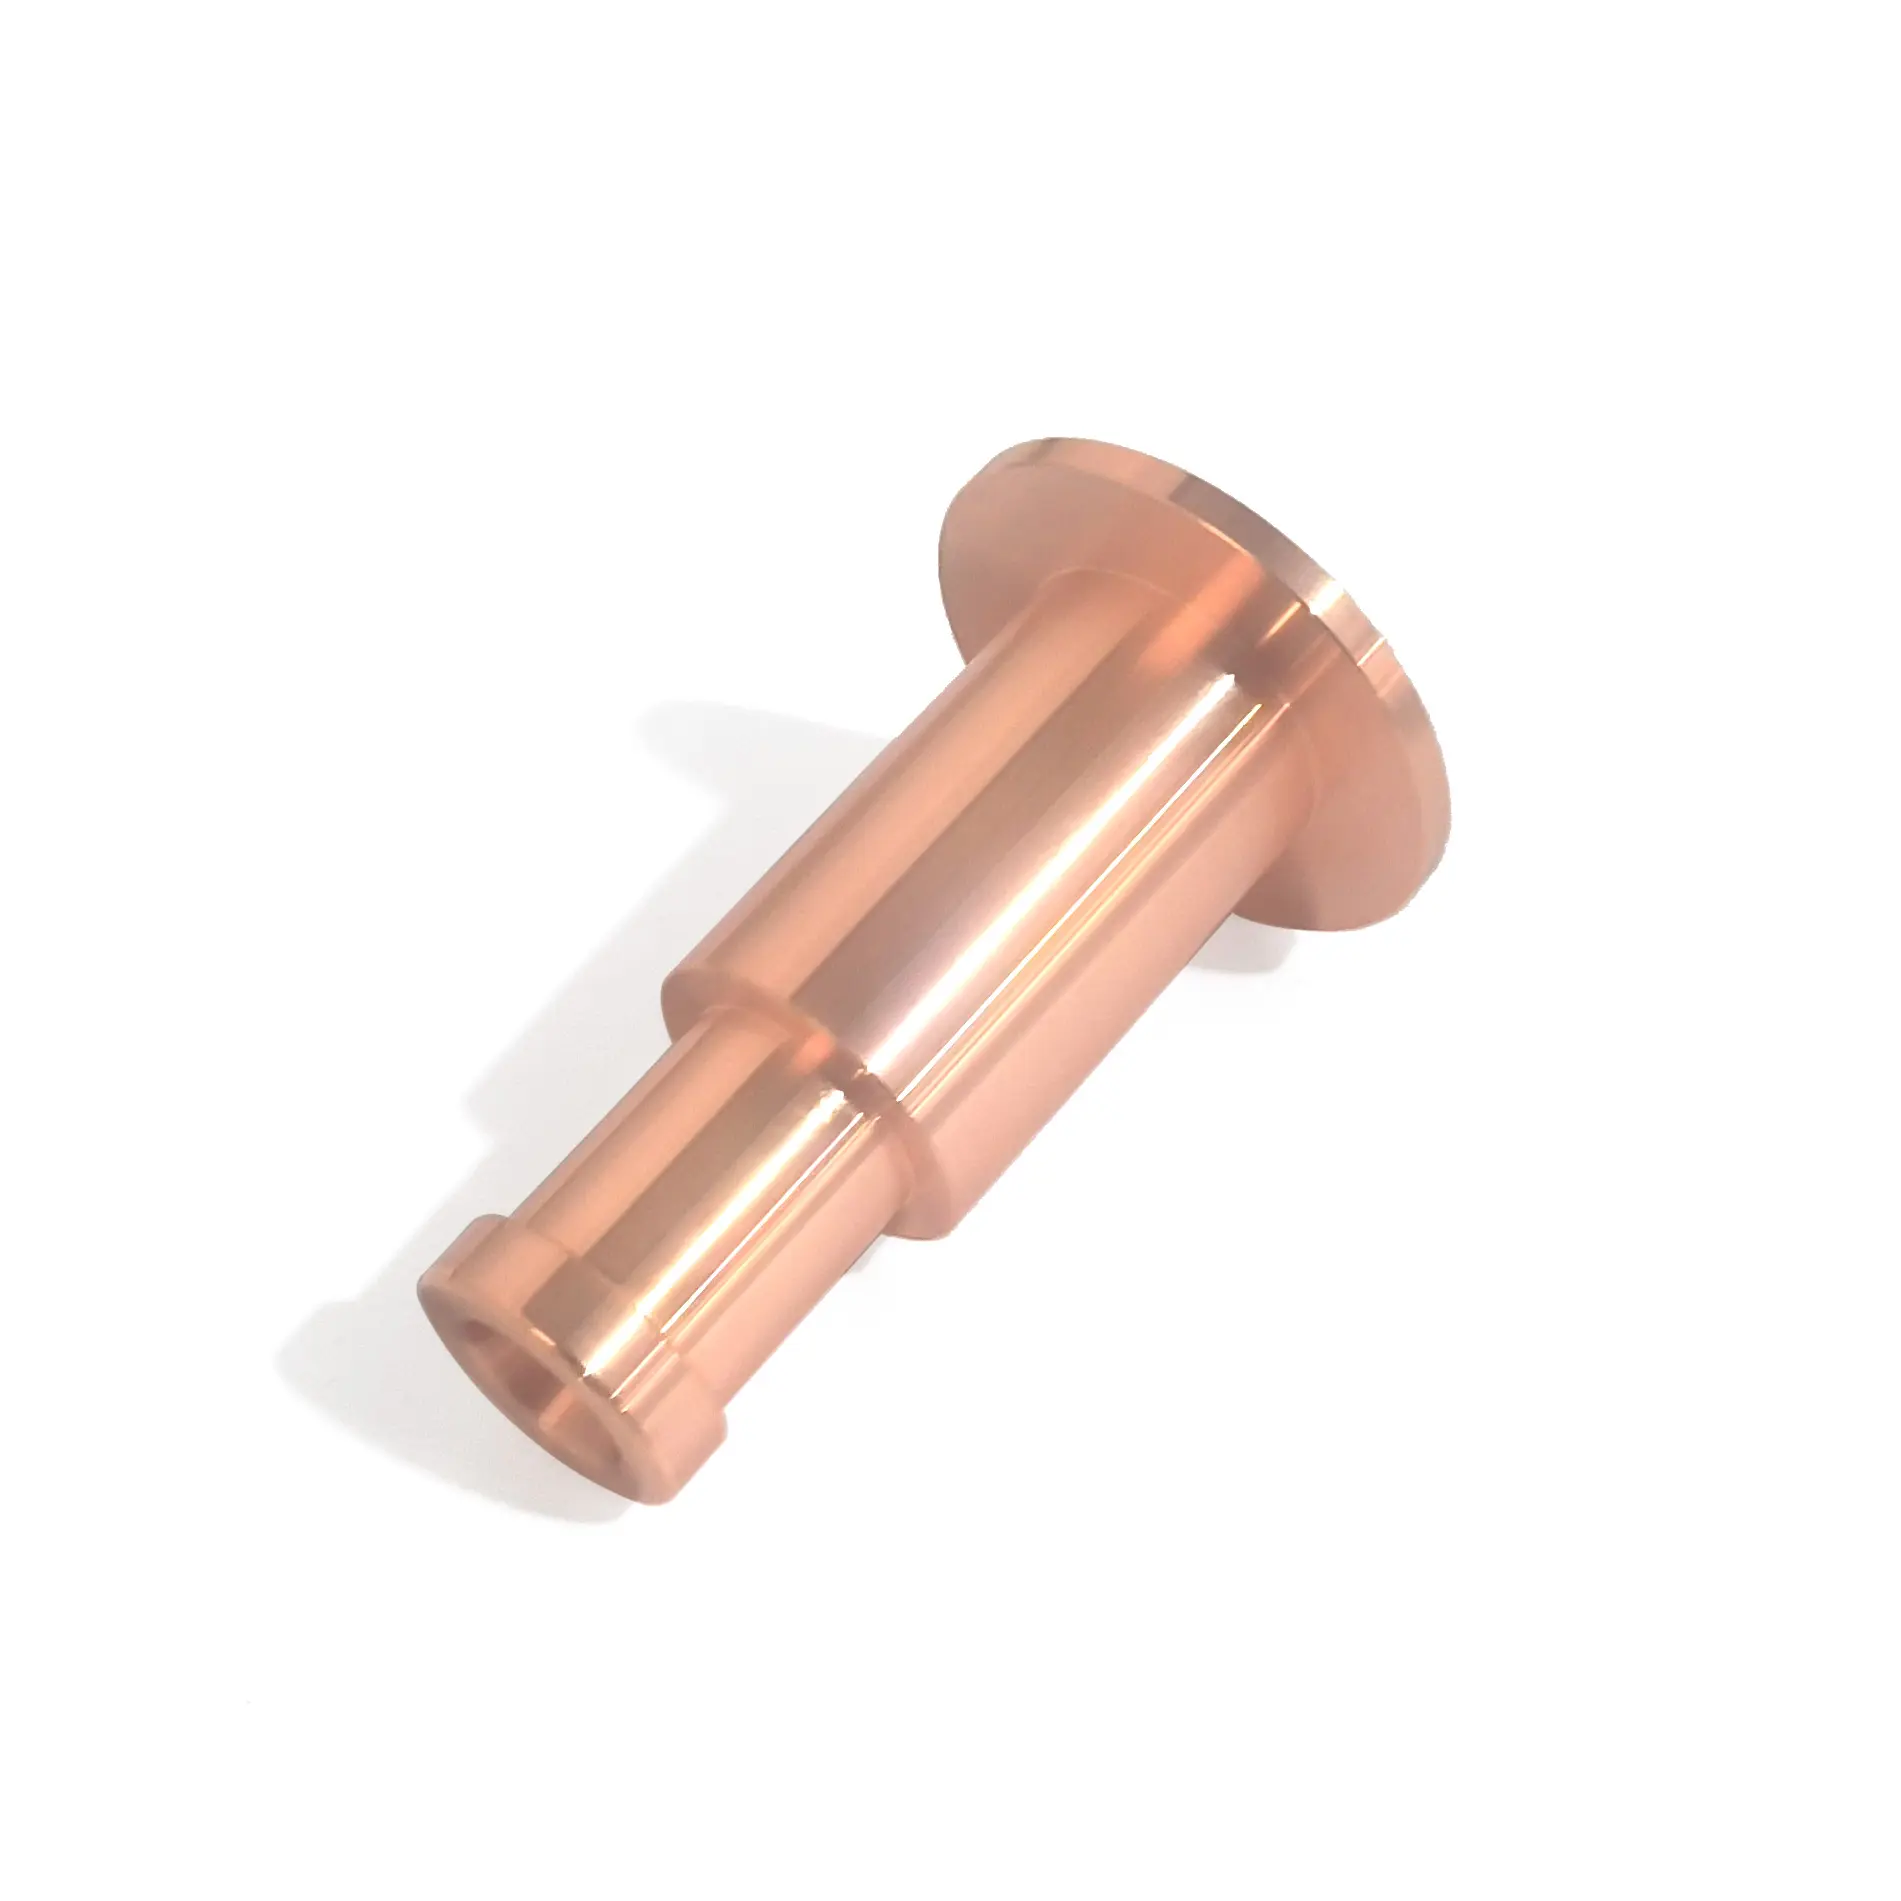 High precision oem cnc turning copper fitting parts